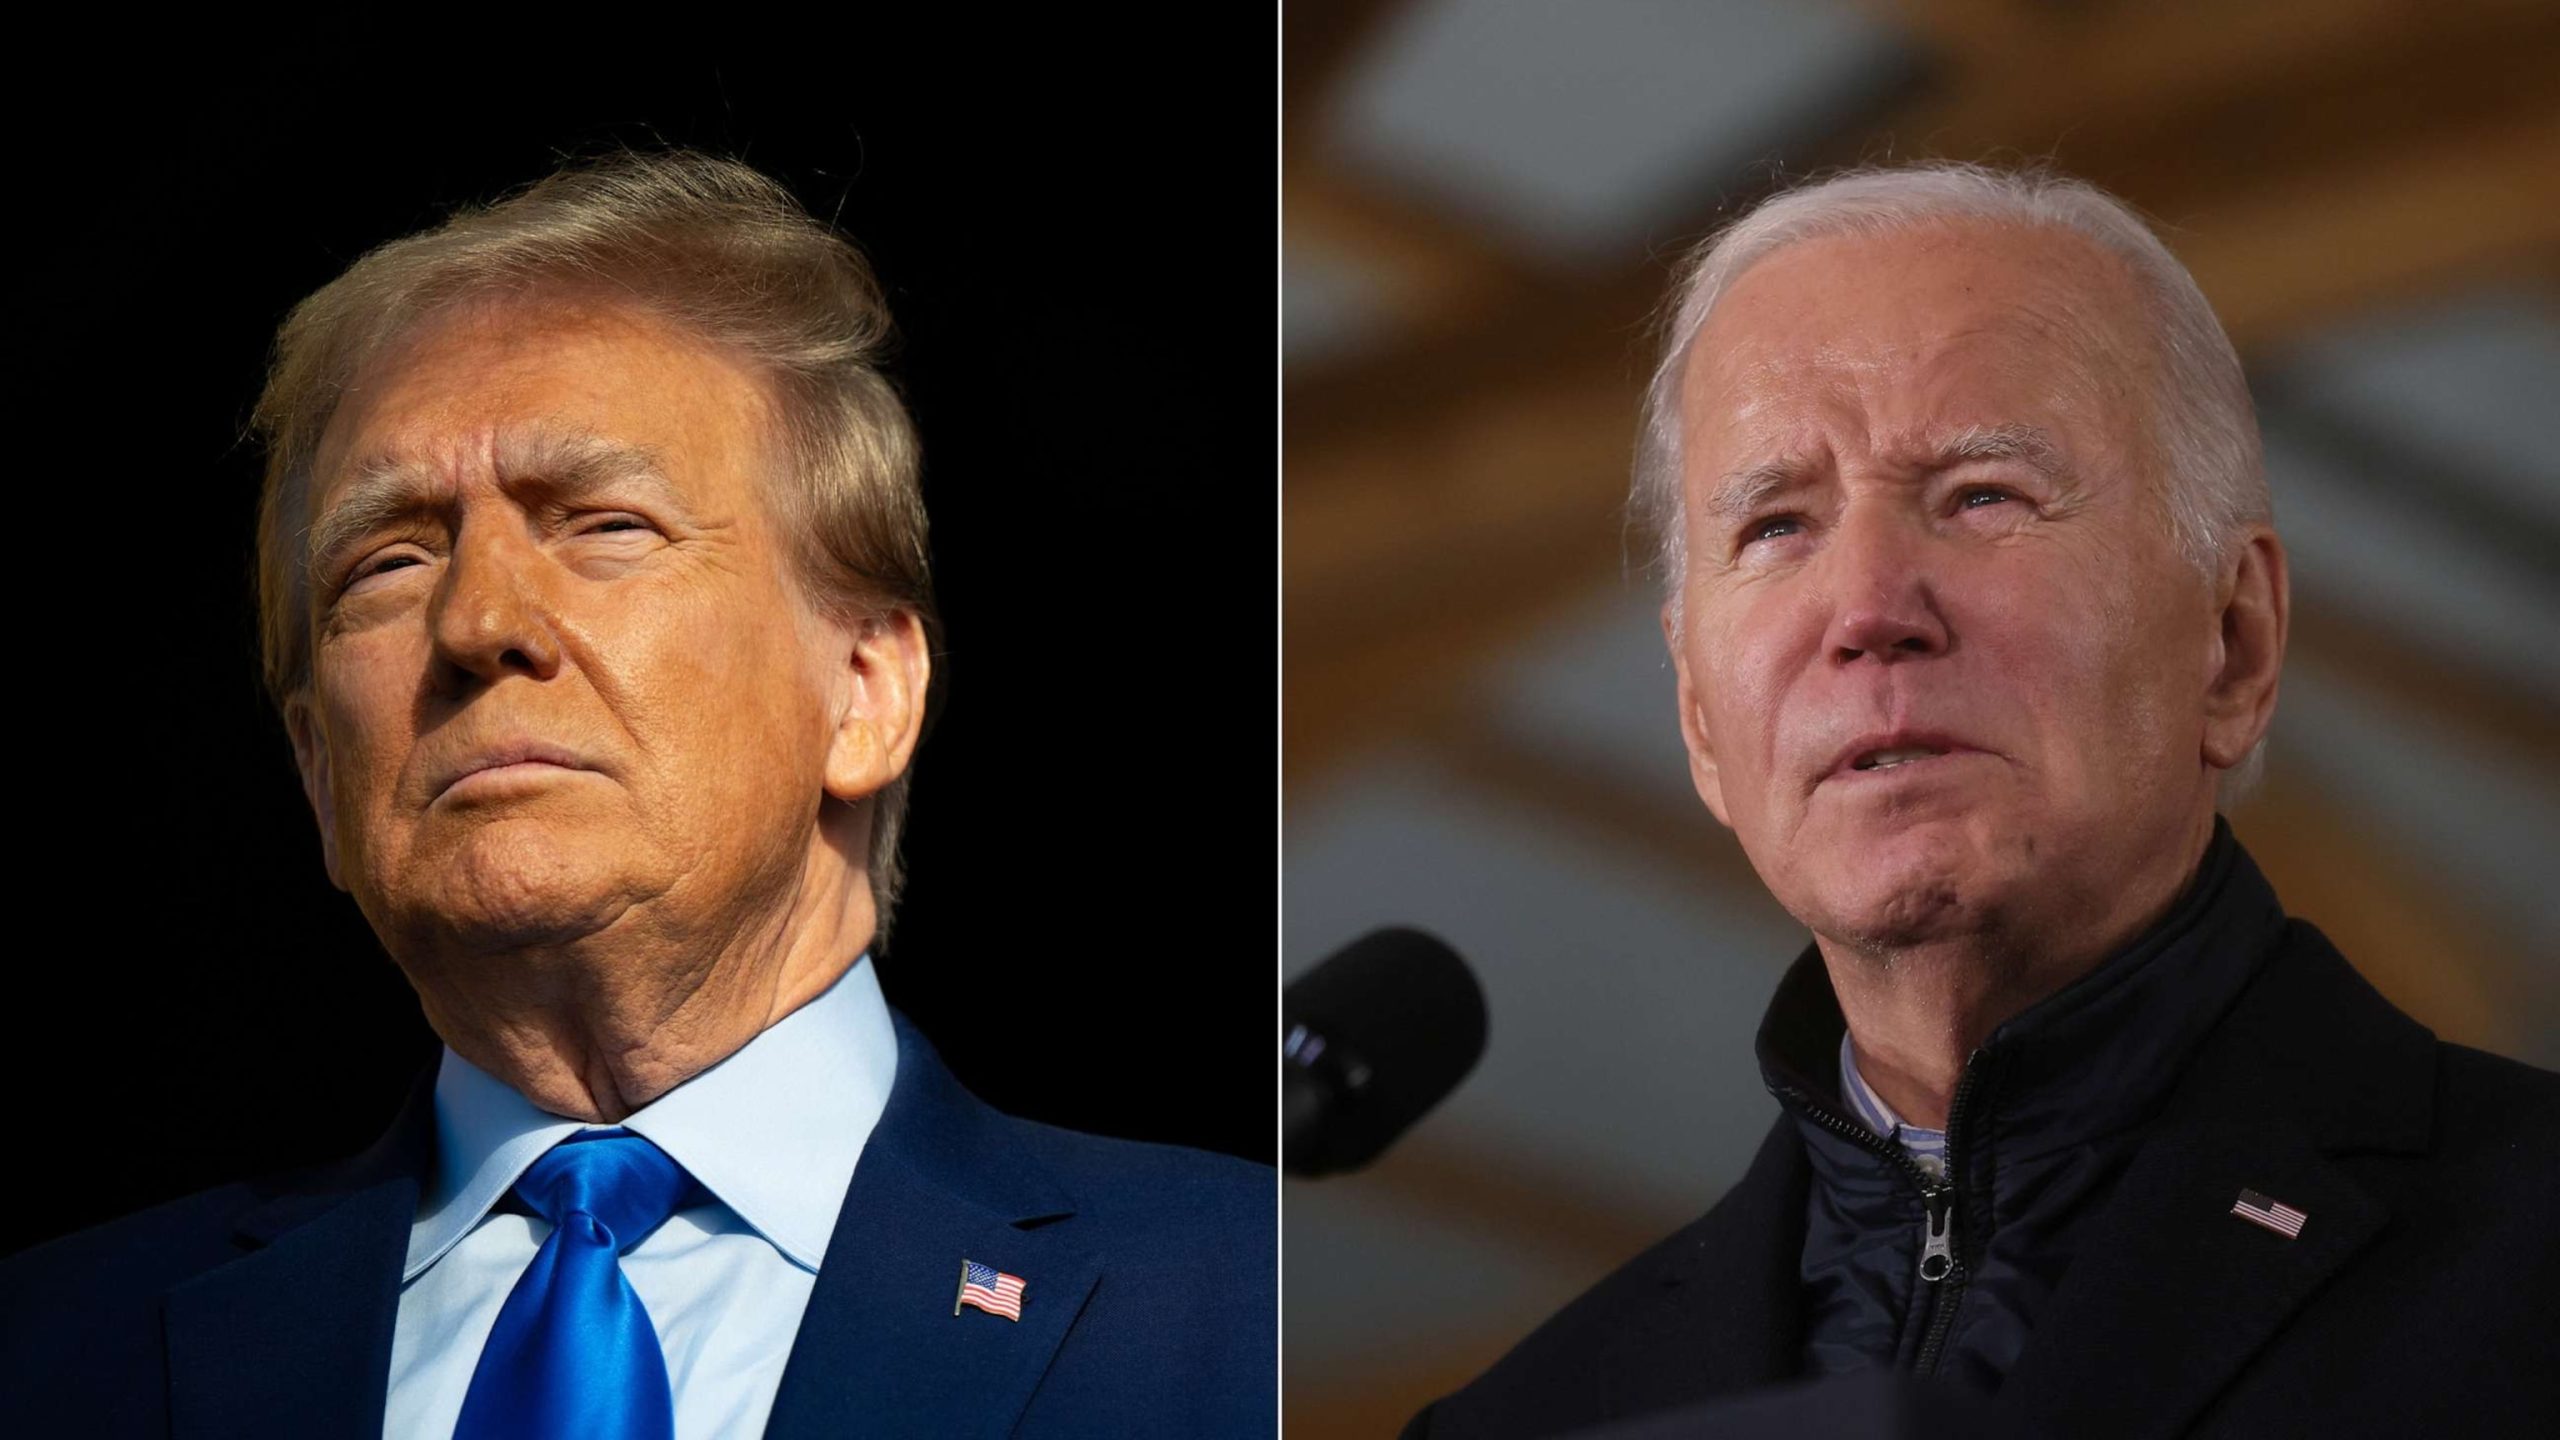 Analysis of Biden Team's Efforts to Downplay Poor Poll Numbers and Other Notable Campaign Takeaways